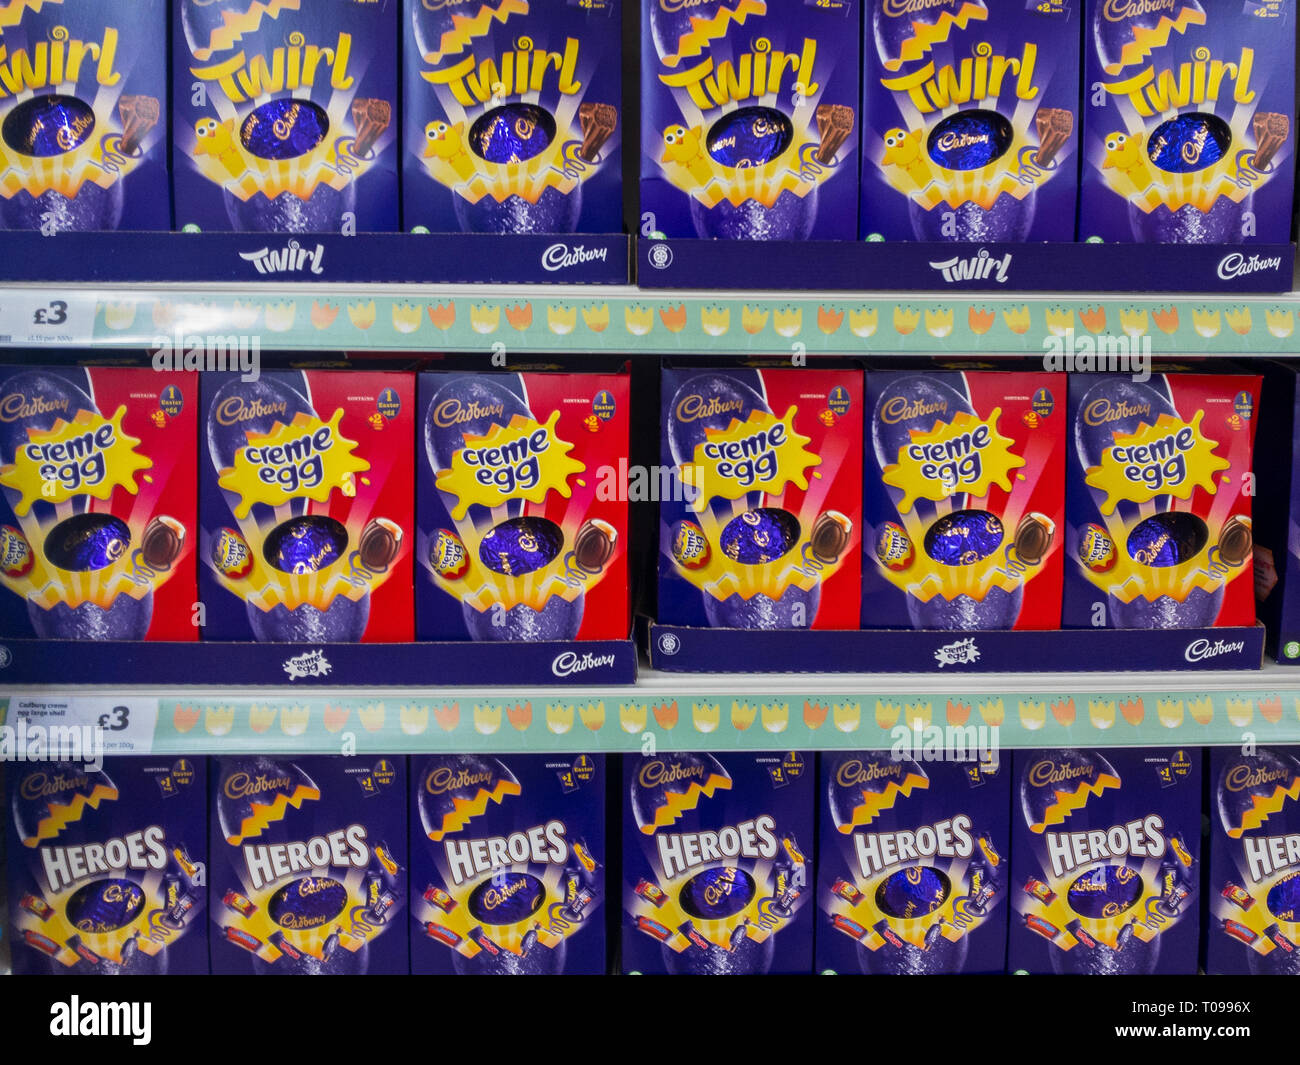 Exeter, Devon , England, March, 14, 2019: A UK supermarket filled shelves selling chocolate Easter Eggs. Lots of purple and red in the image, horizont Stock Photo